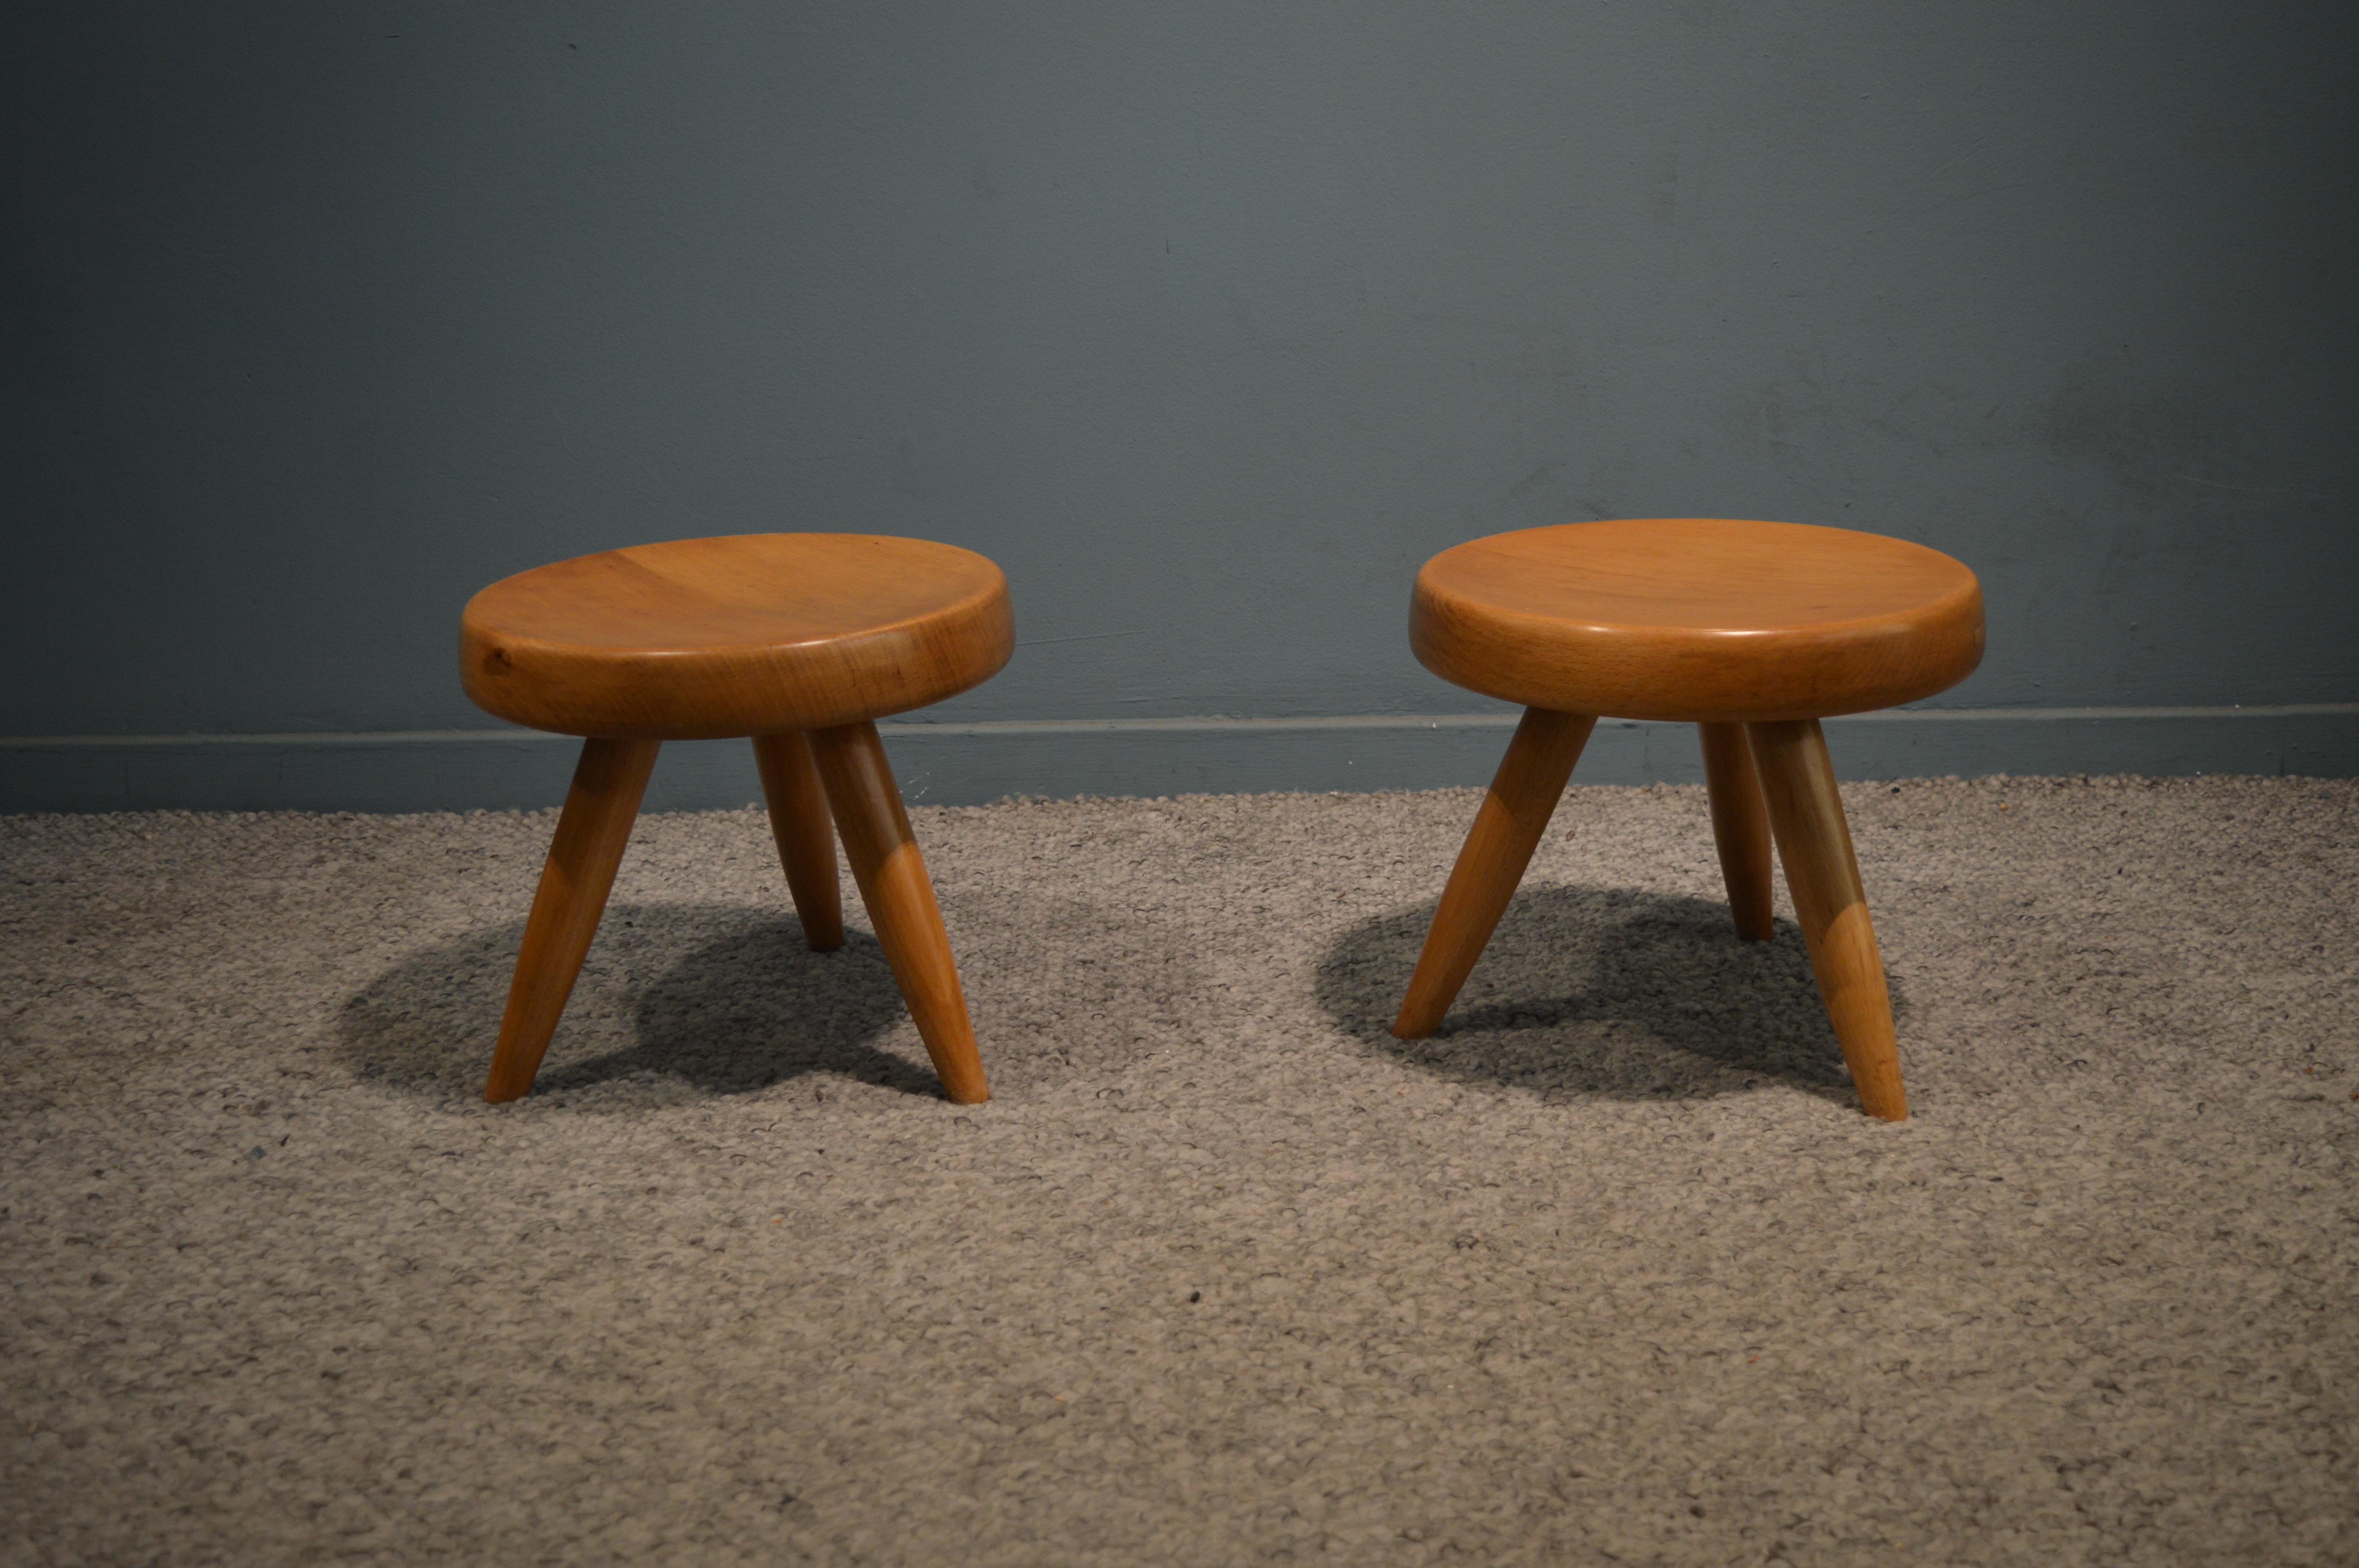 Original pair of stools by Charlotte Perriand.
French work, circa 1950.
I have made them clean by a professional except the bottom of the seat to show the original patina.